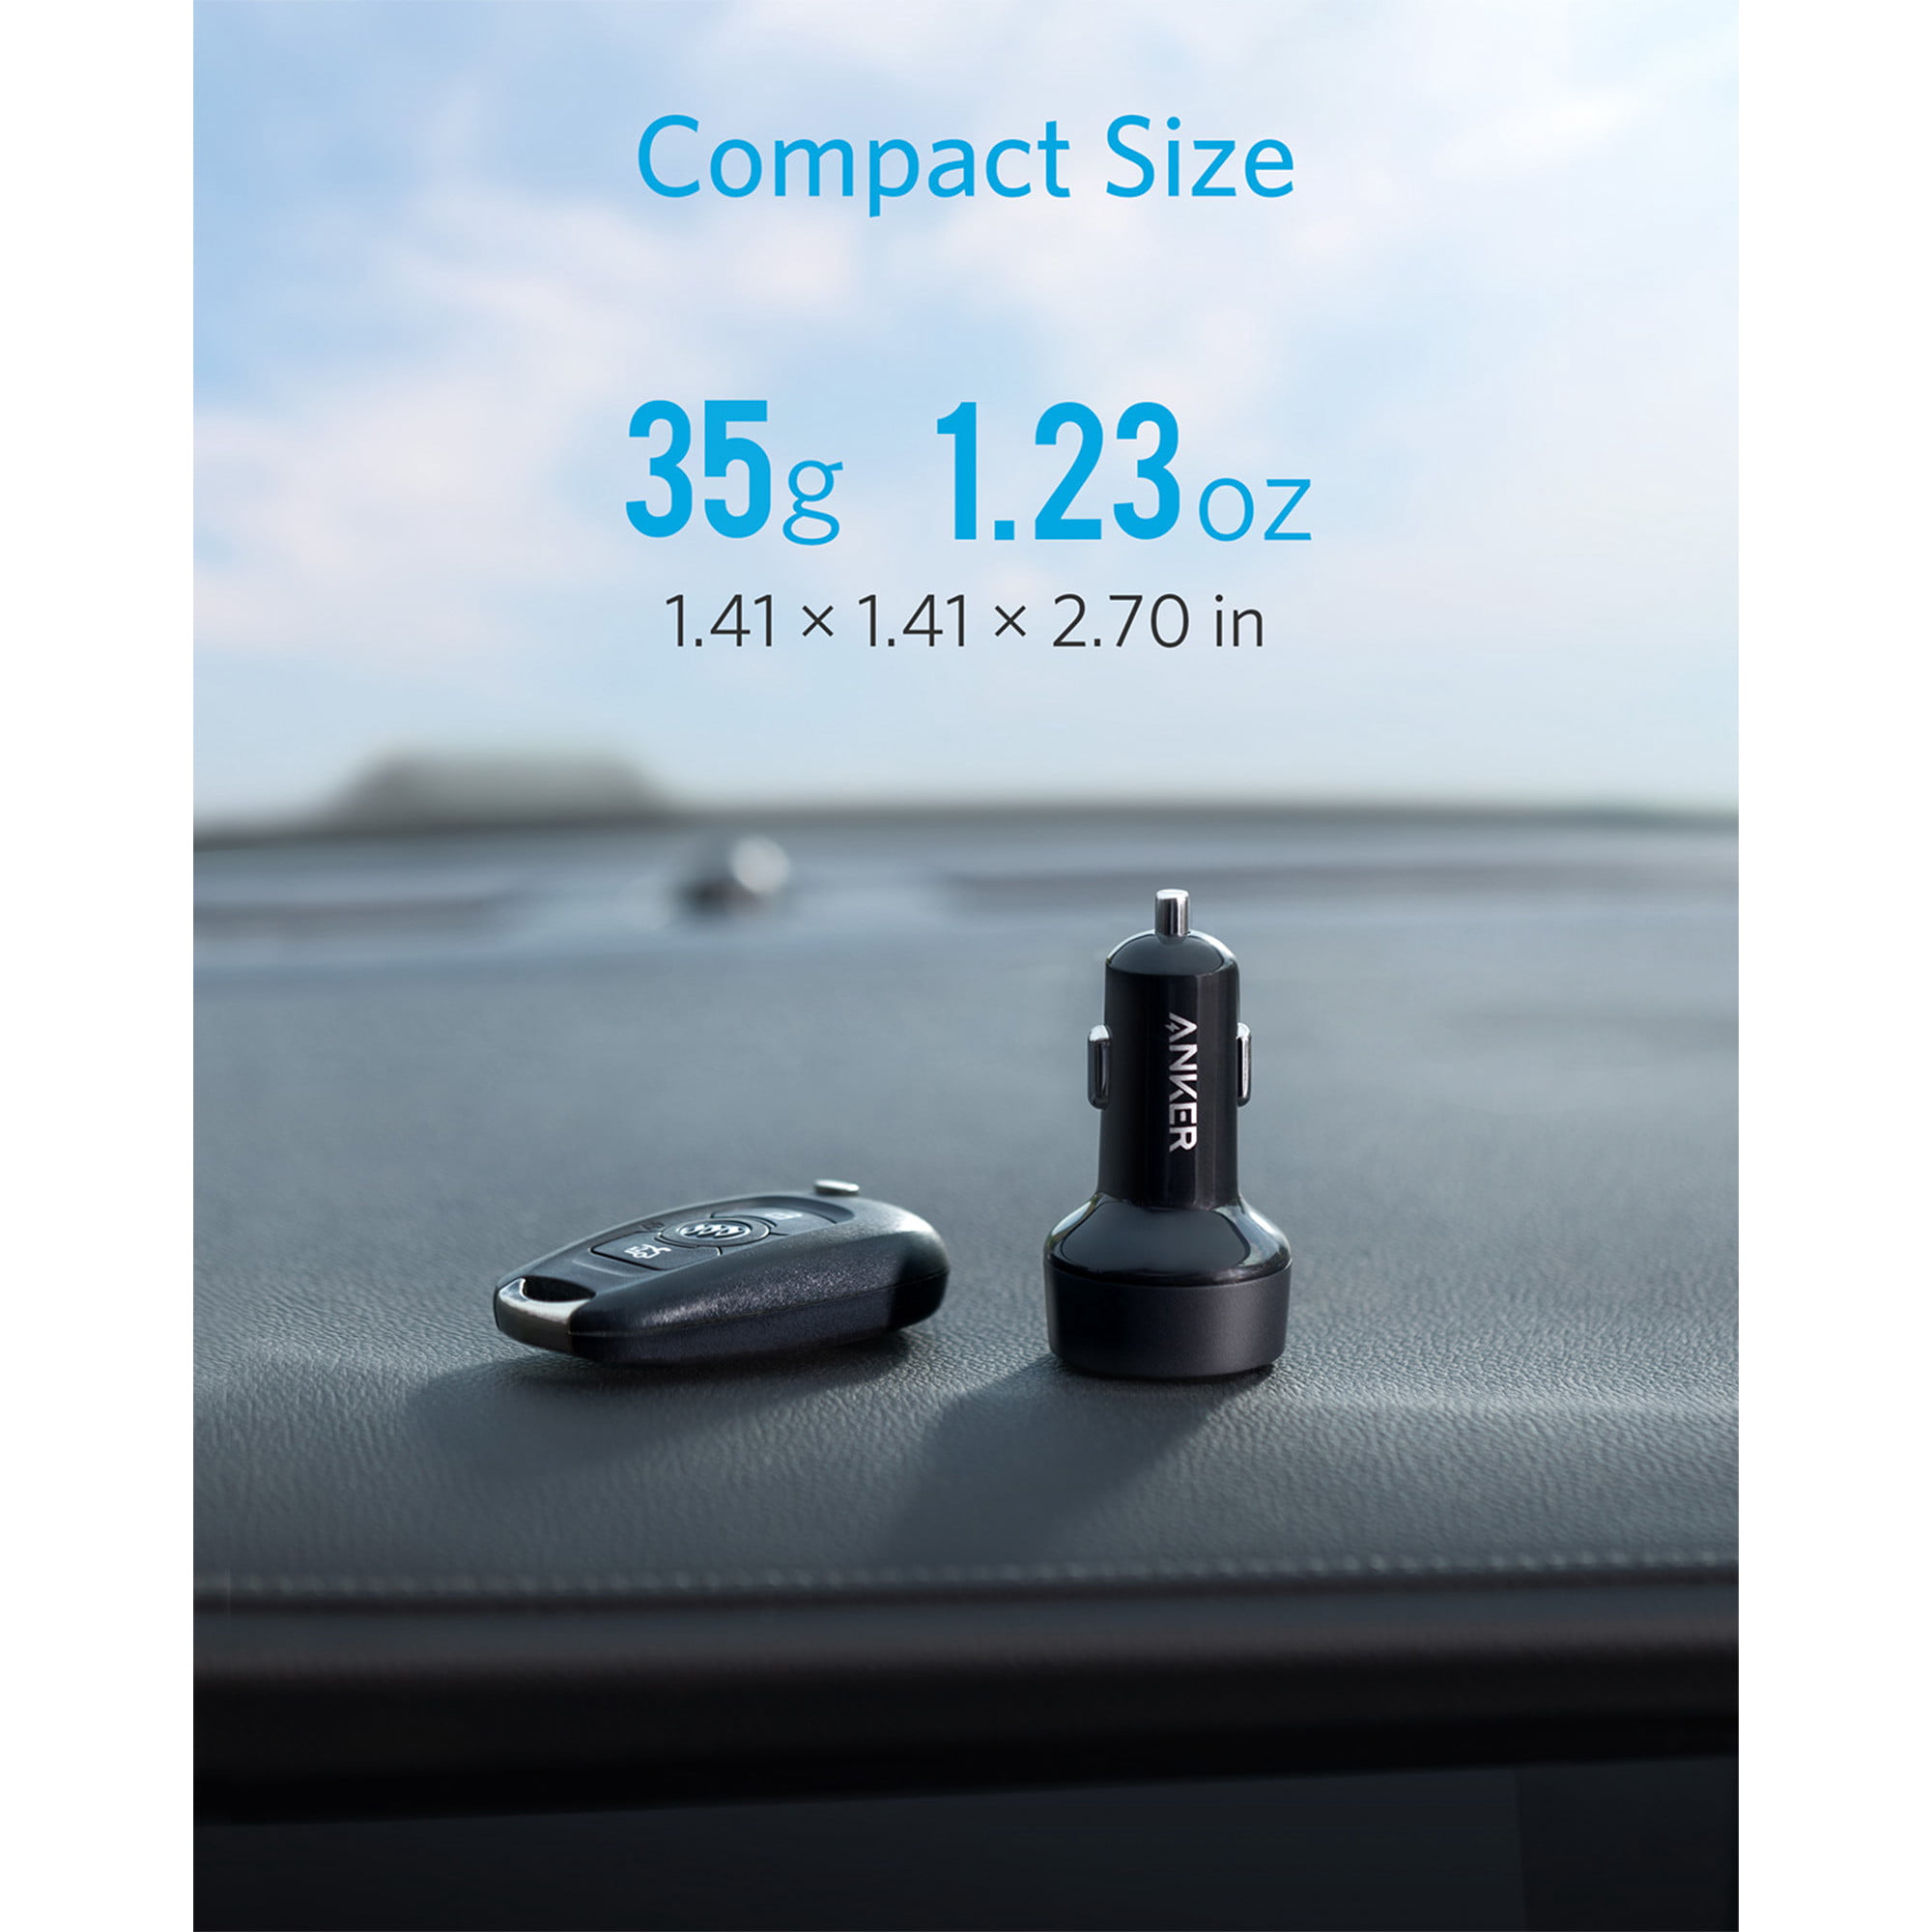 Anker Car Charger USB C, 35W 2-Port Compact Type C Car Charger with 20W Power Delivery and 15W PowerIQ 2.0, PowerDrive PD 2 Car Charger for iPhone 12 / 11 / X /8, Pixel 3/2/XL